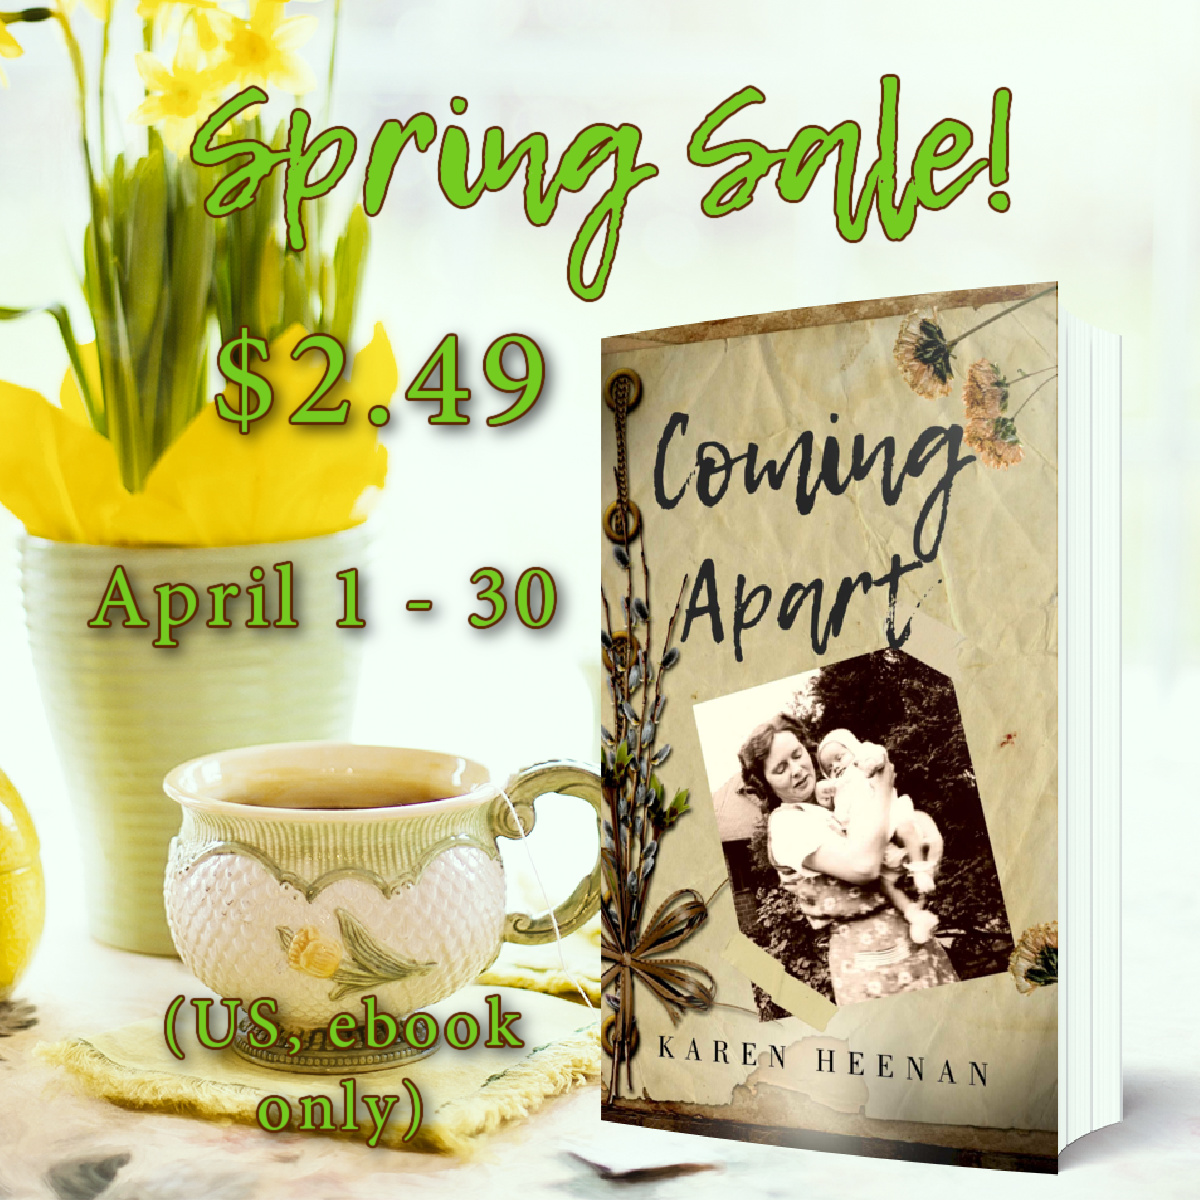 Amazon has very kindly put Coming Apart on a Kindle Deal sale for the month of April. US only, but you can get the ebook for only $2.49! amazon.com/dp/B0B86QTBQR #historicalfiction #histfic #womensfiction #sisters #family #1930sfiction #philadelphiafiction #BooksWorthReading